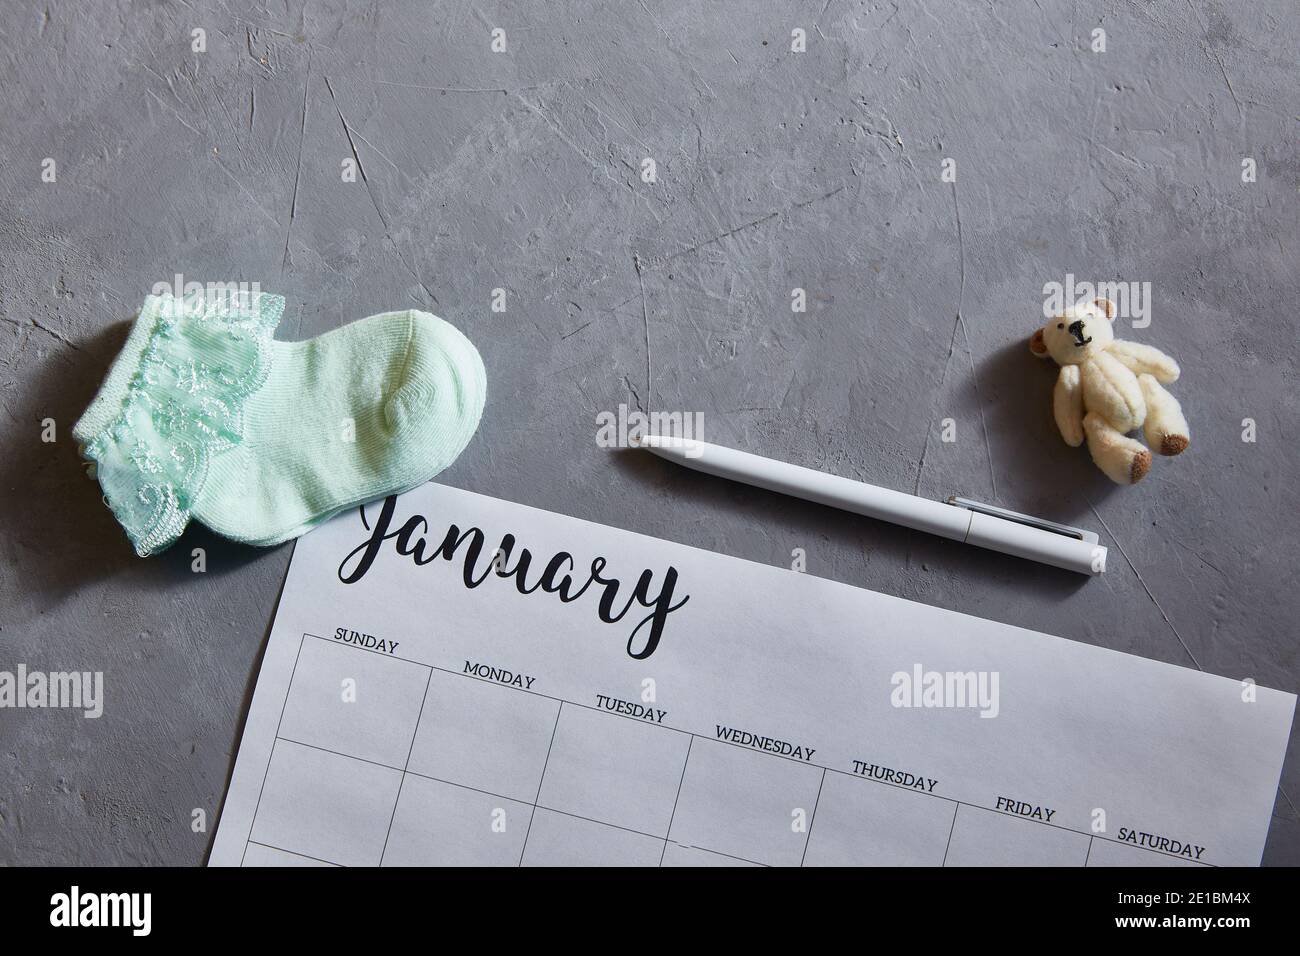 The announcement of the pregnancy. Baby socks, toy, calendar on a gray concrete background. Stock Photo